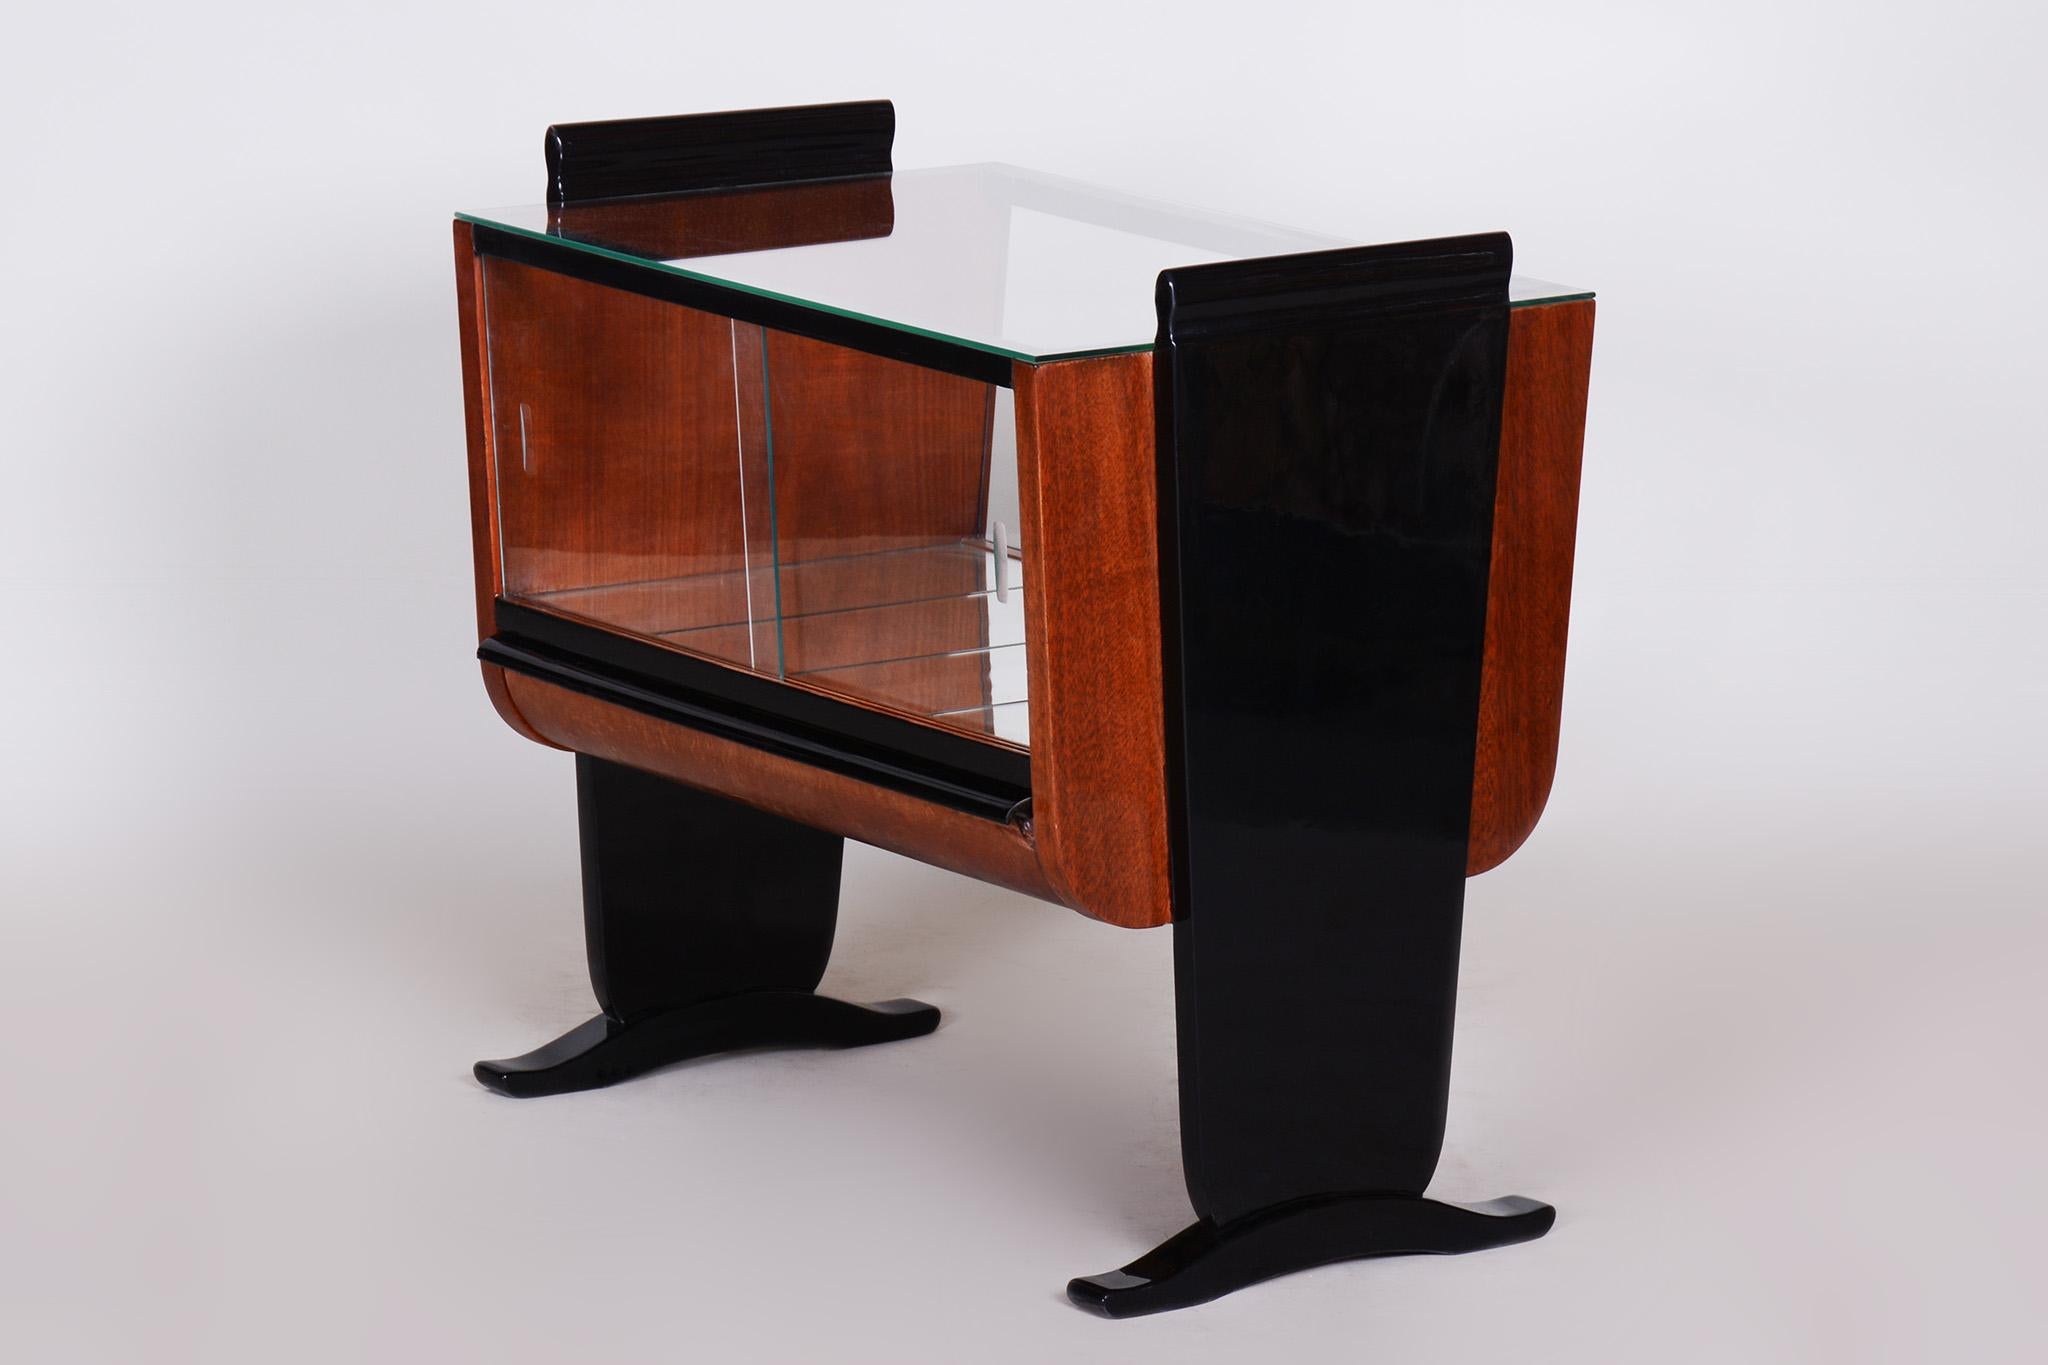 20th Century Halabala Designed Small Table Made by UP Závody in Czechia, 1930s, Restored For Sale